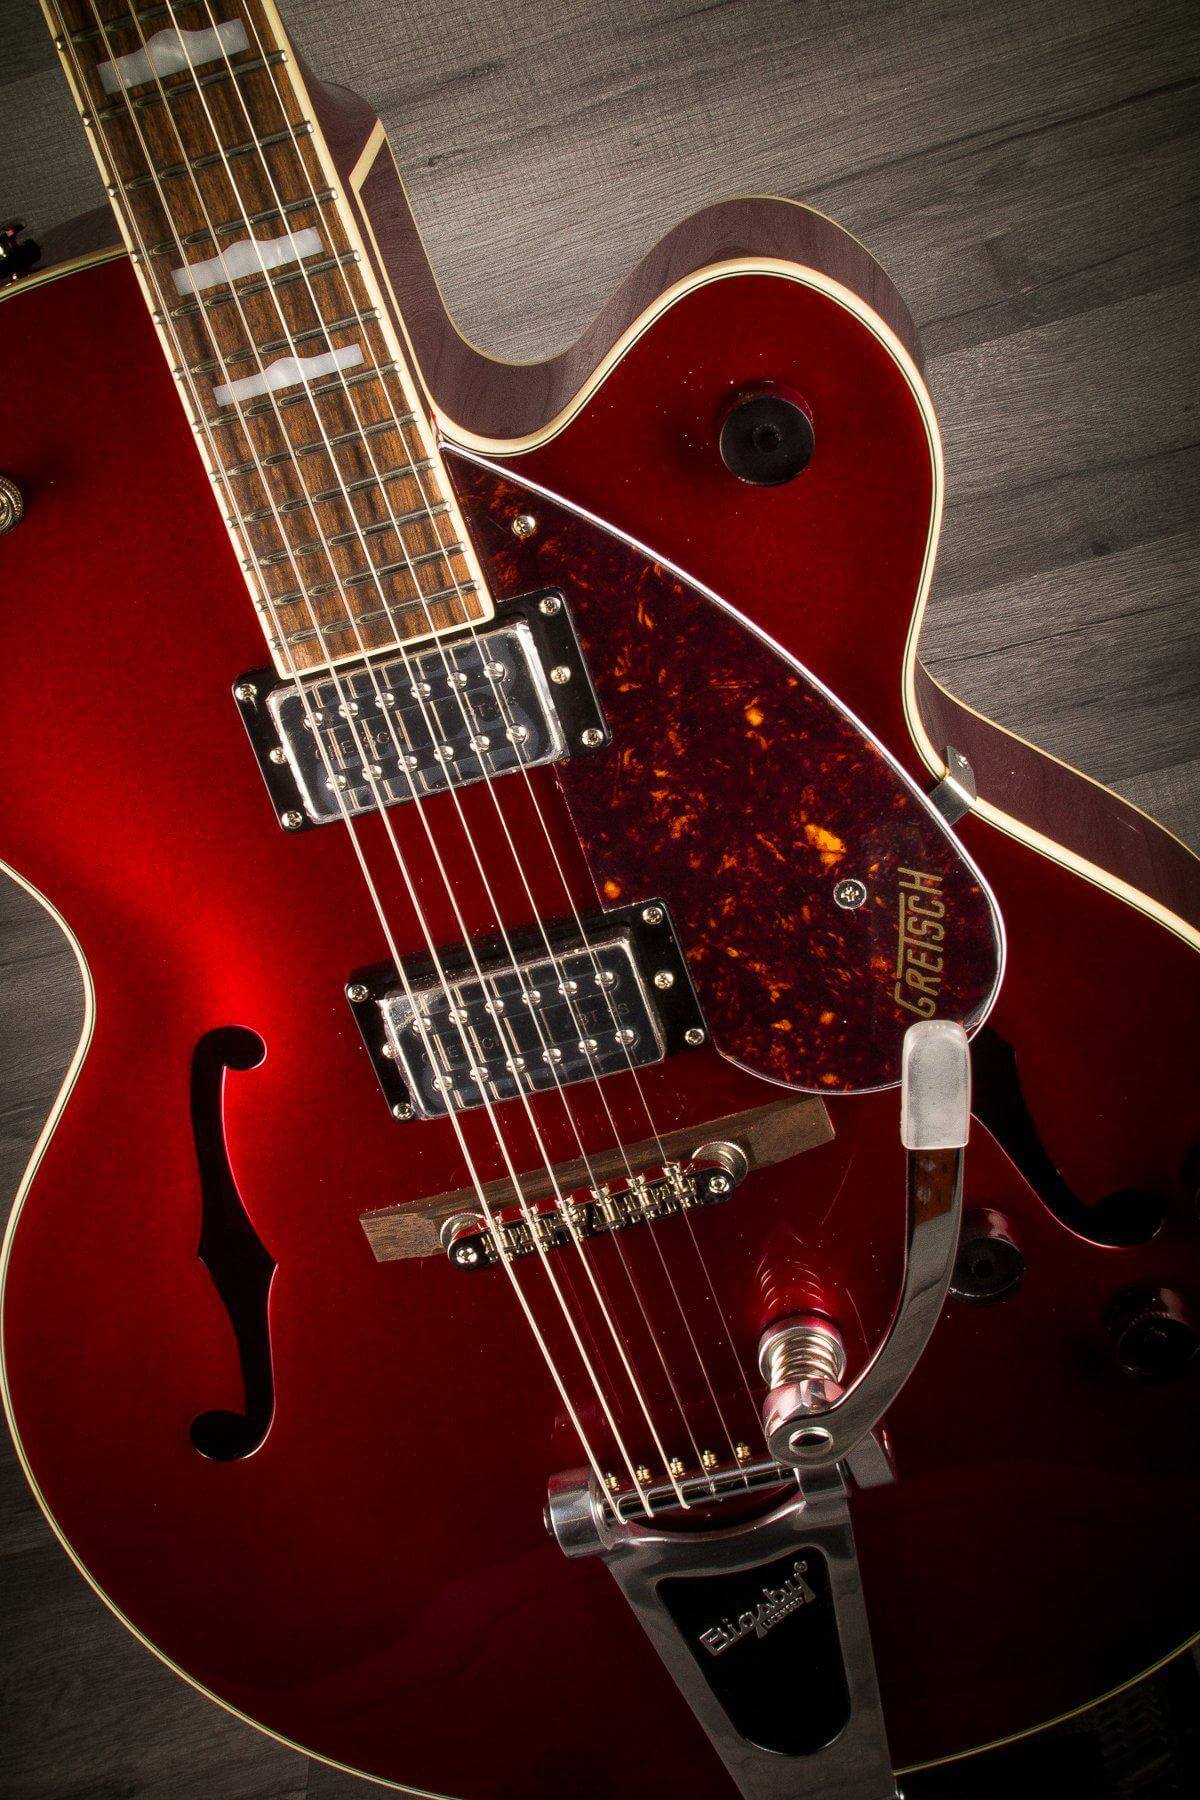 Gretsch Electric Guitar Gretsch G2420T Streamliner Hollow Body With Bigsby, Candy Apple Red